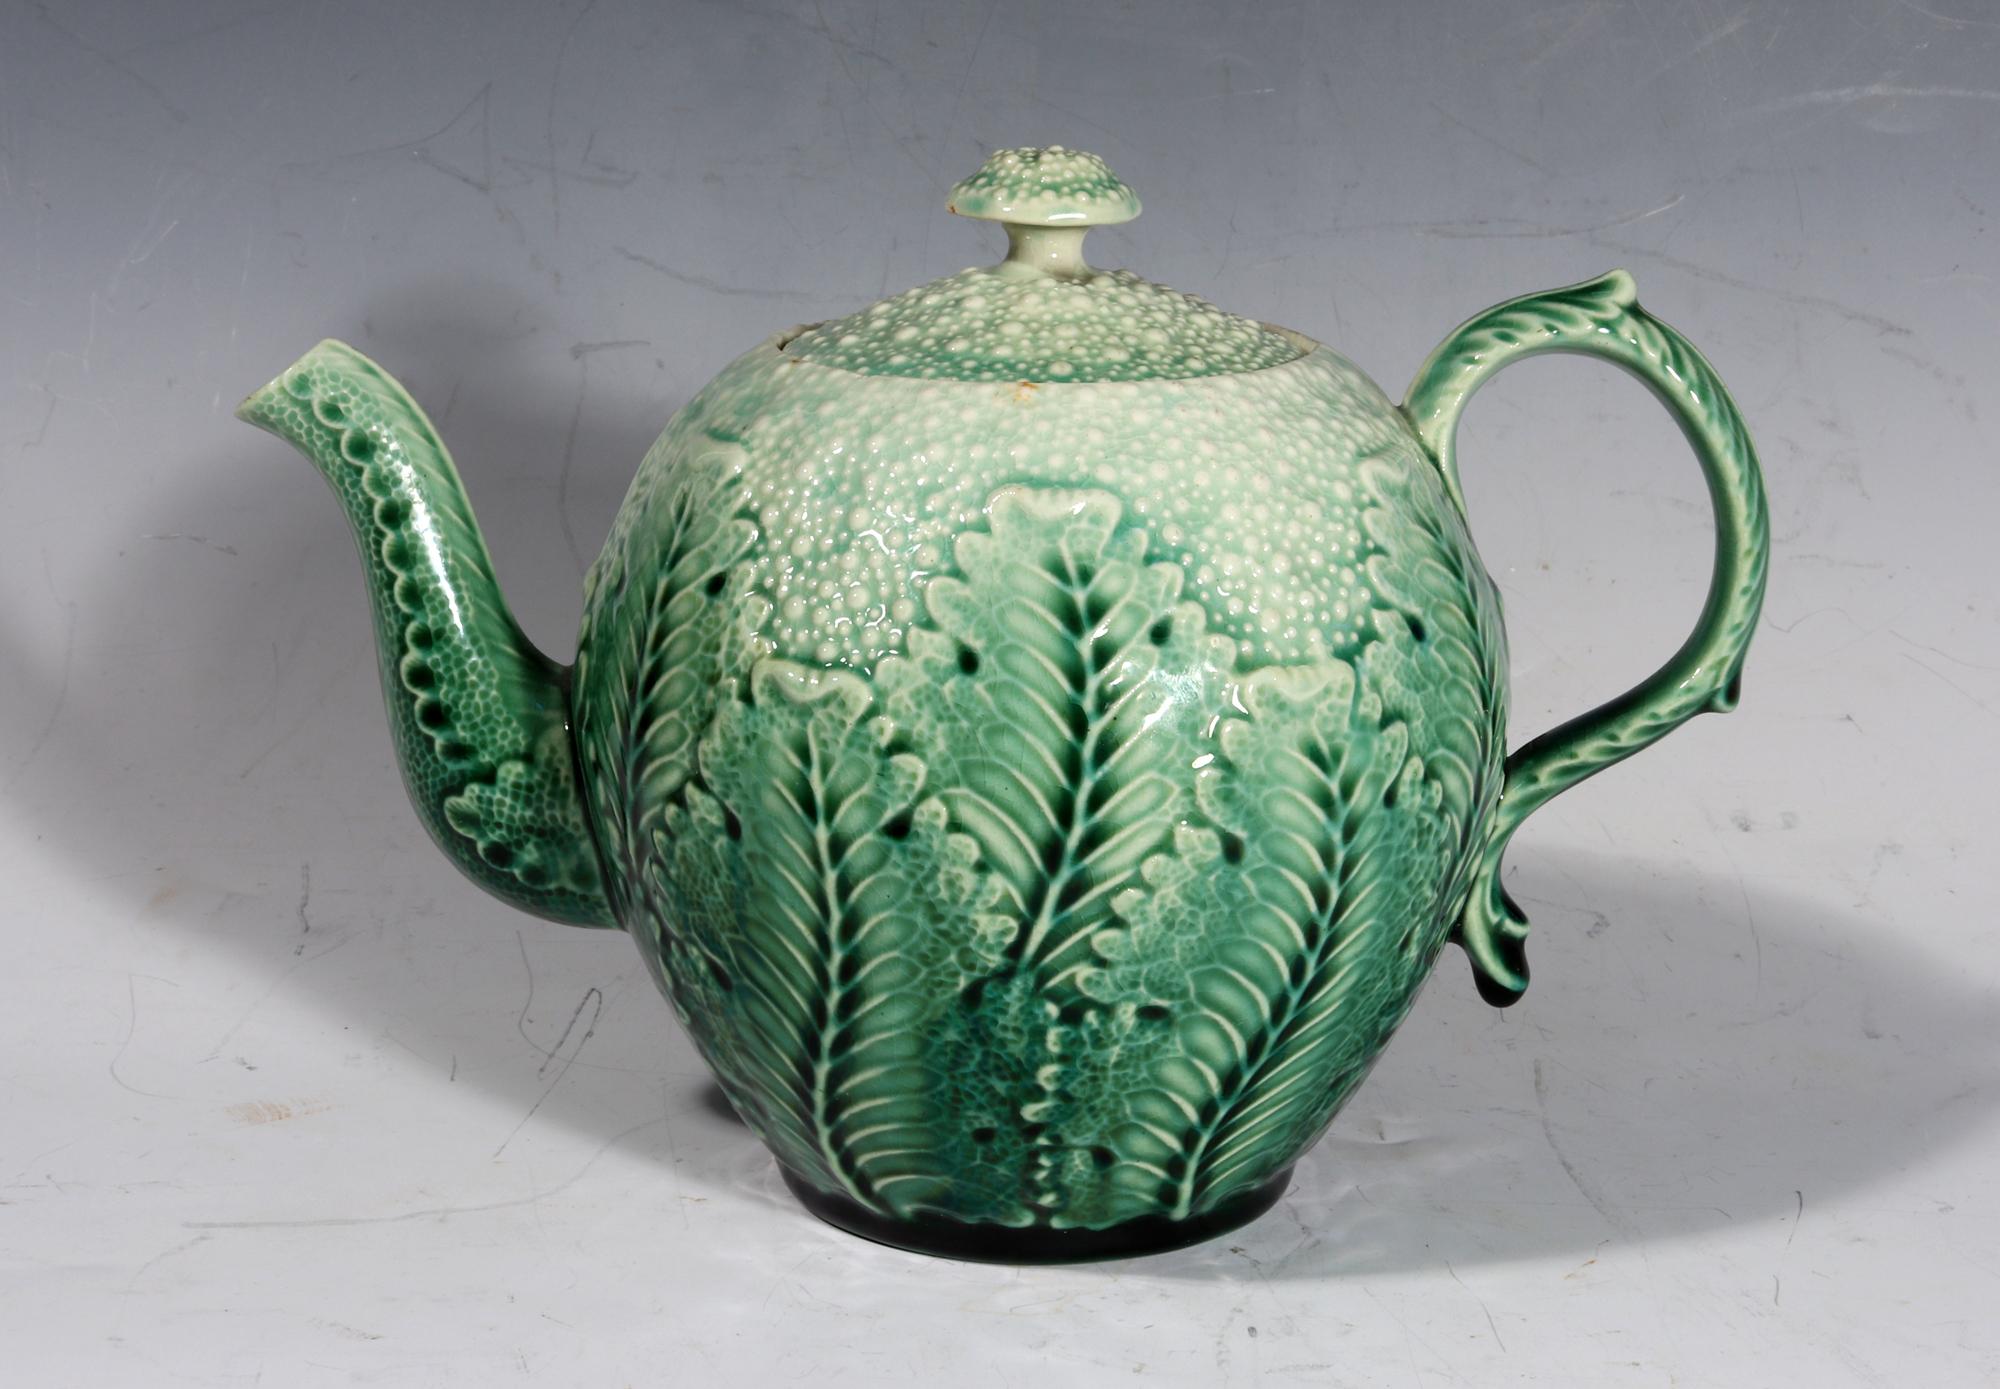 American Etruscan Majolica Teapot in the form of a Cauliflower,
Early Majolica-type body,
Circa 1860

The green molded tromp L'oeil teapot is designed as a small cauliflower, the sides with overlapping leaves.

Dimensions: 5 3/4 inches high x